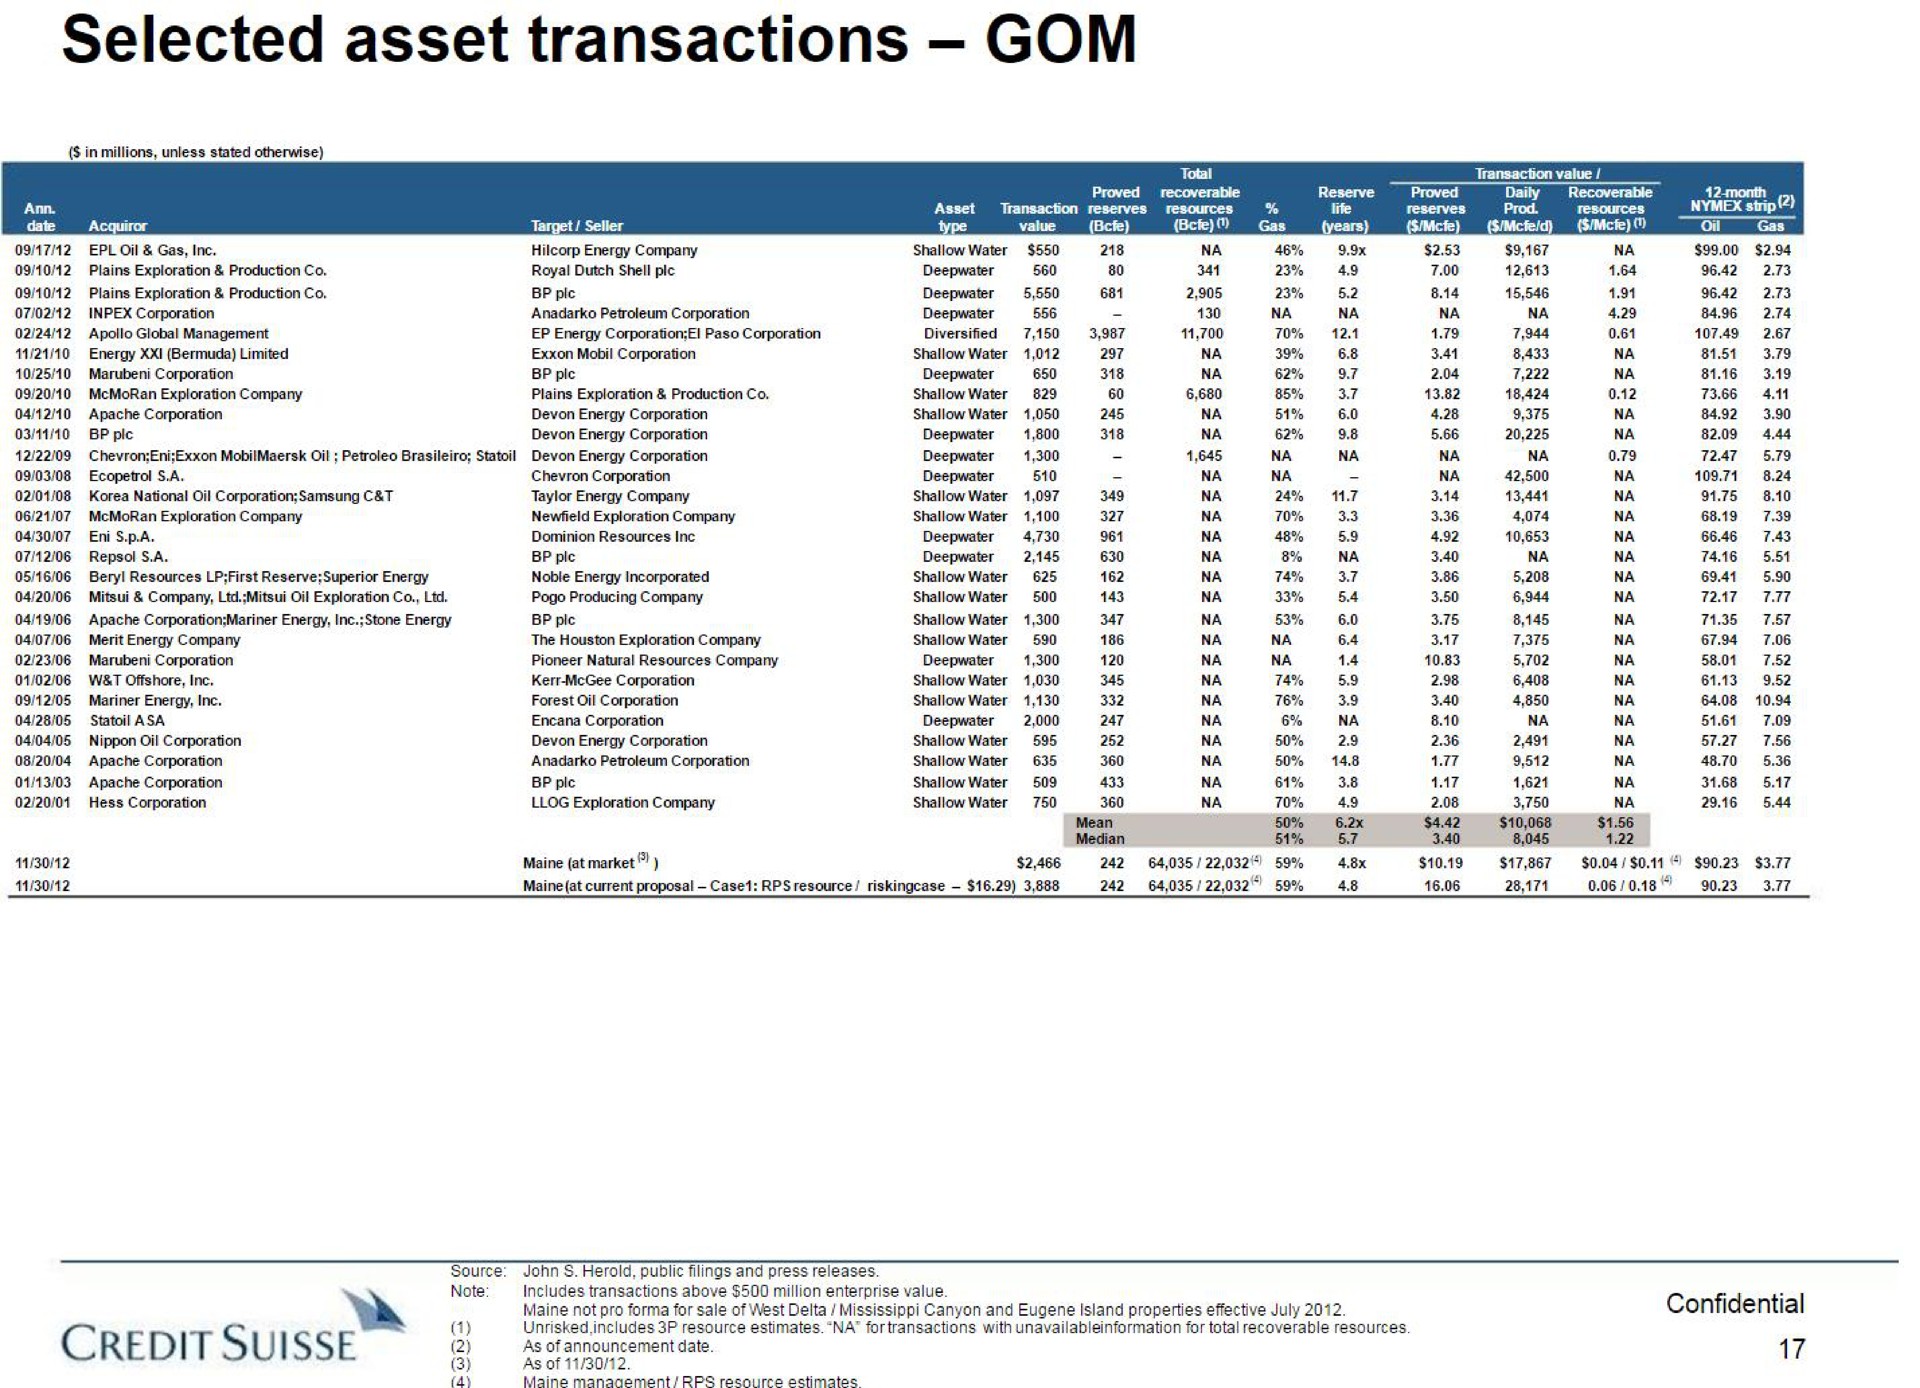 selected asset transactions | Credit Suisse